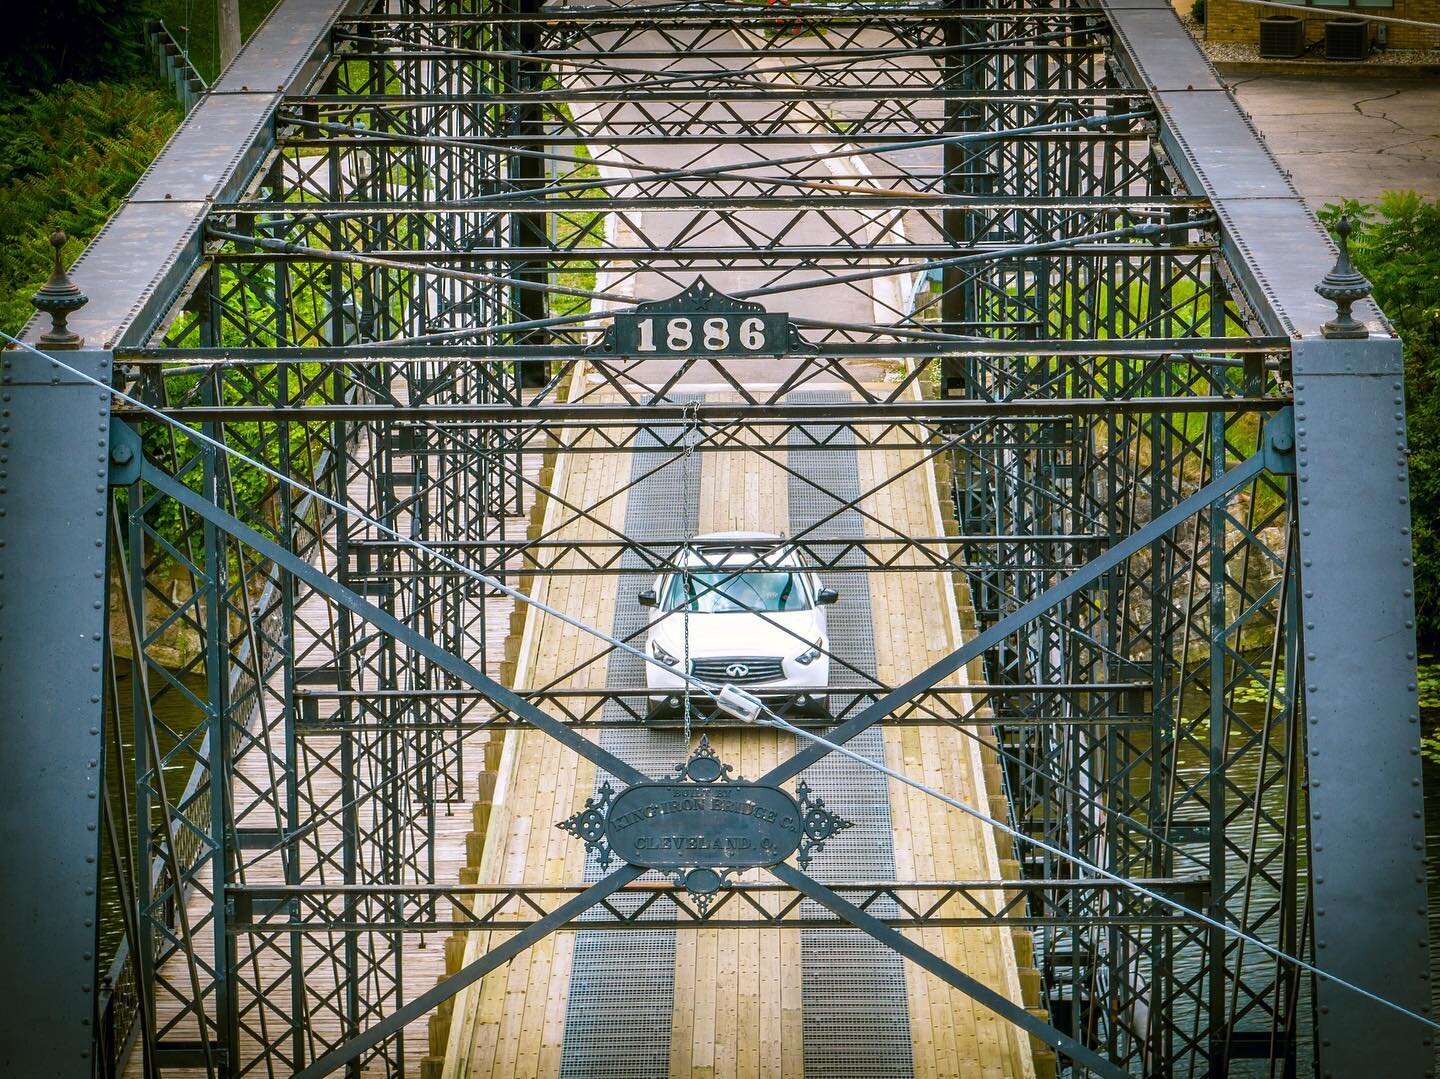 Built in 1886, this wrought-iron truss bridge cost $7,352.25 to build over the Kalamazoo River.

🌎Follow along @wander.onwings &amp; @wander.onwheels 

📍Allegan, Michigan 

DM or click link in bio for print info. Available for hire.

#michigan #bri